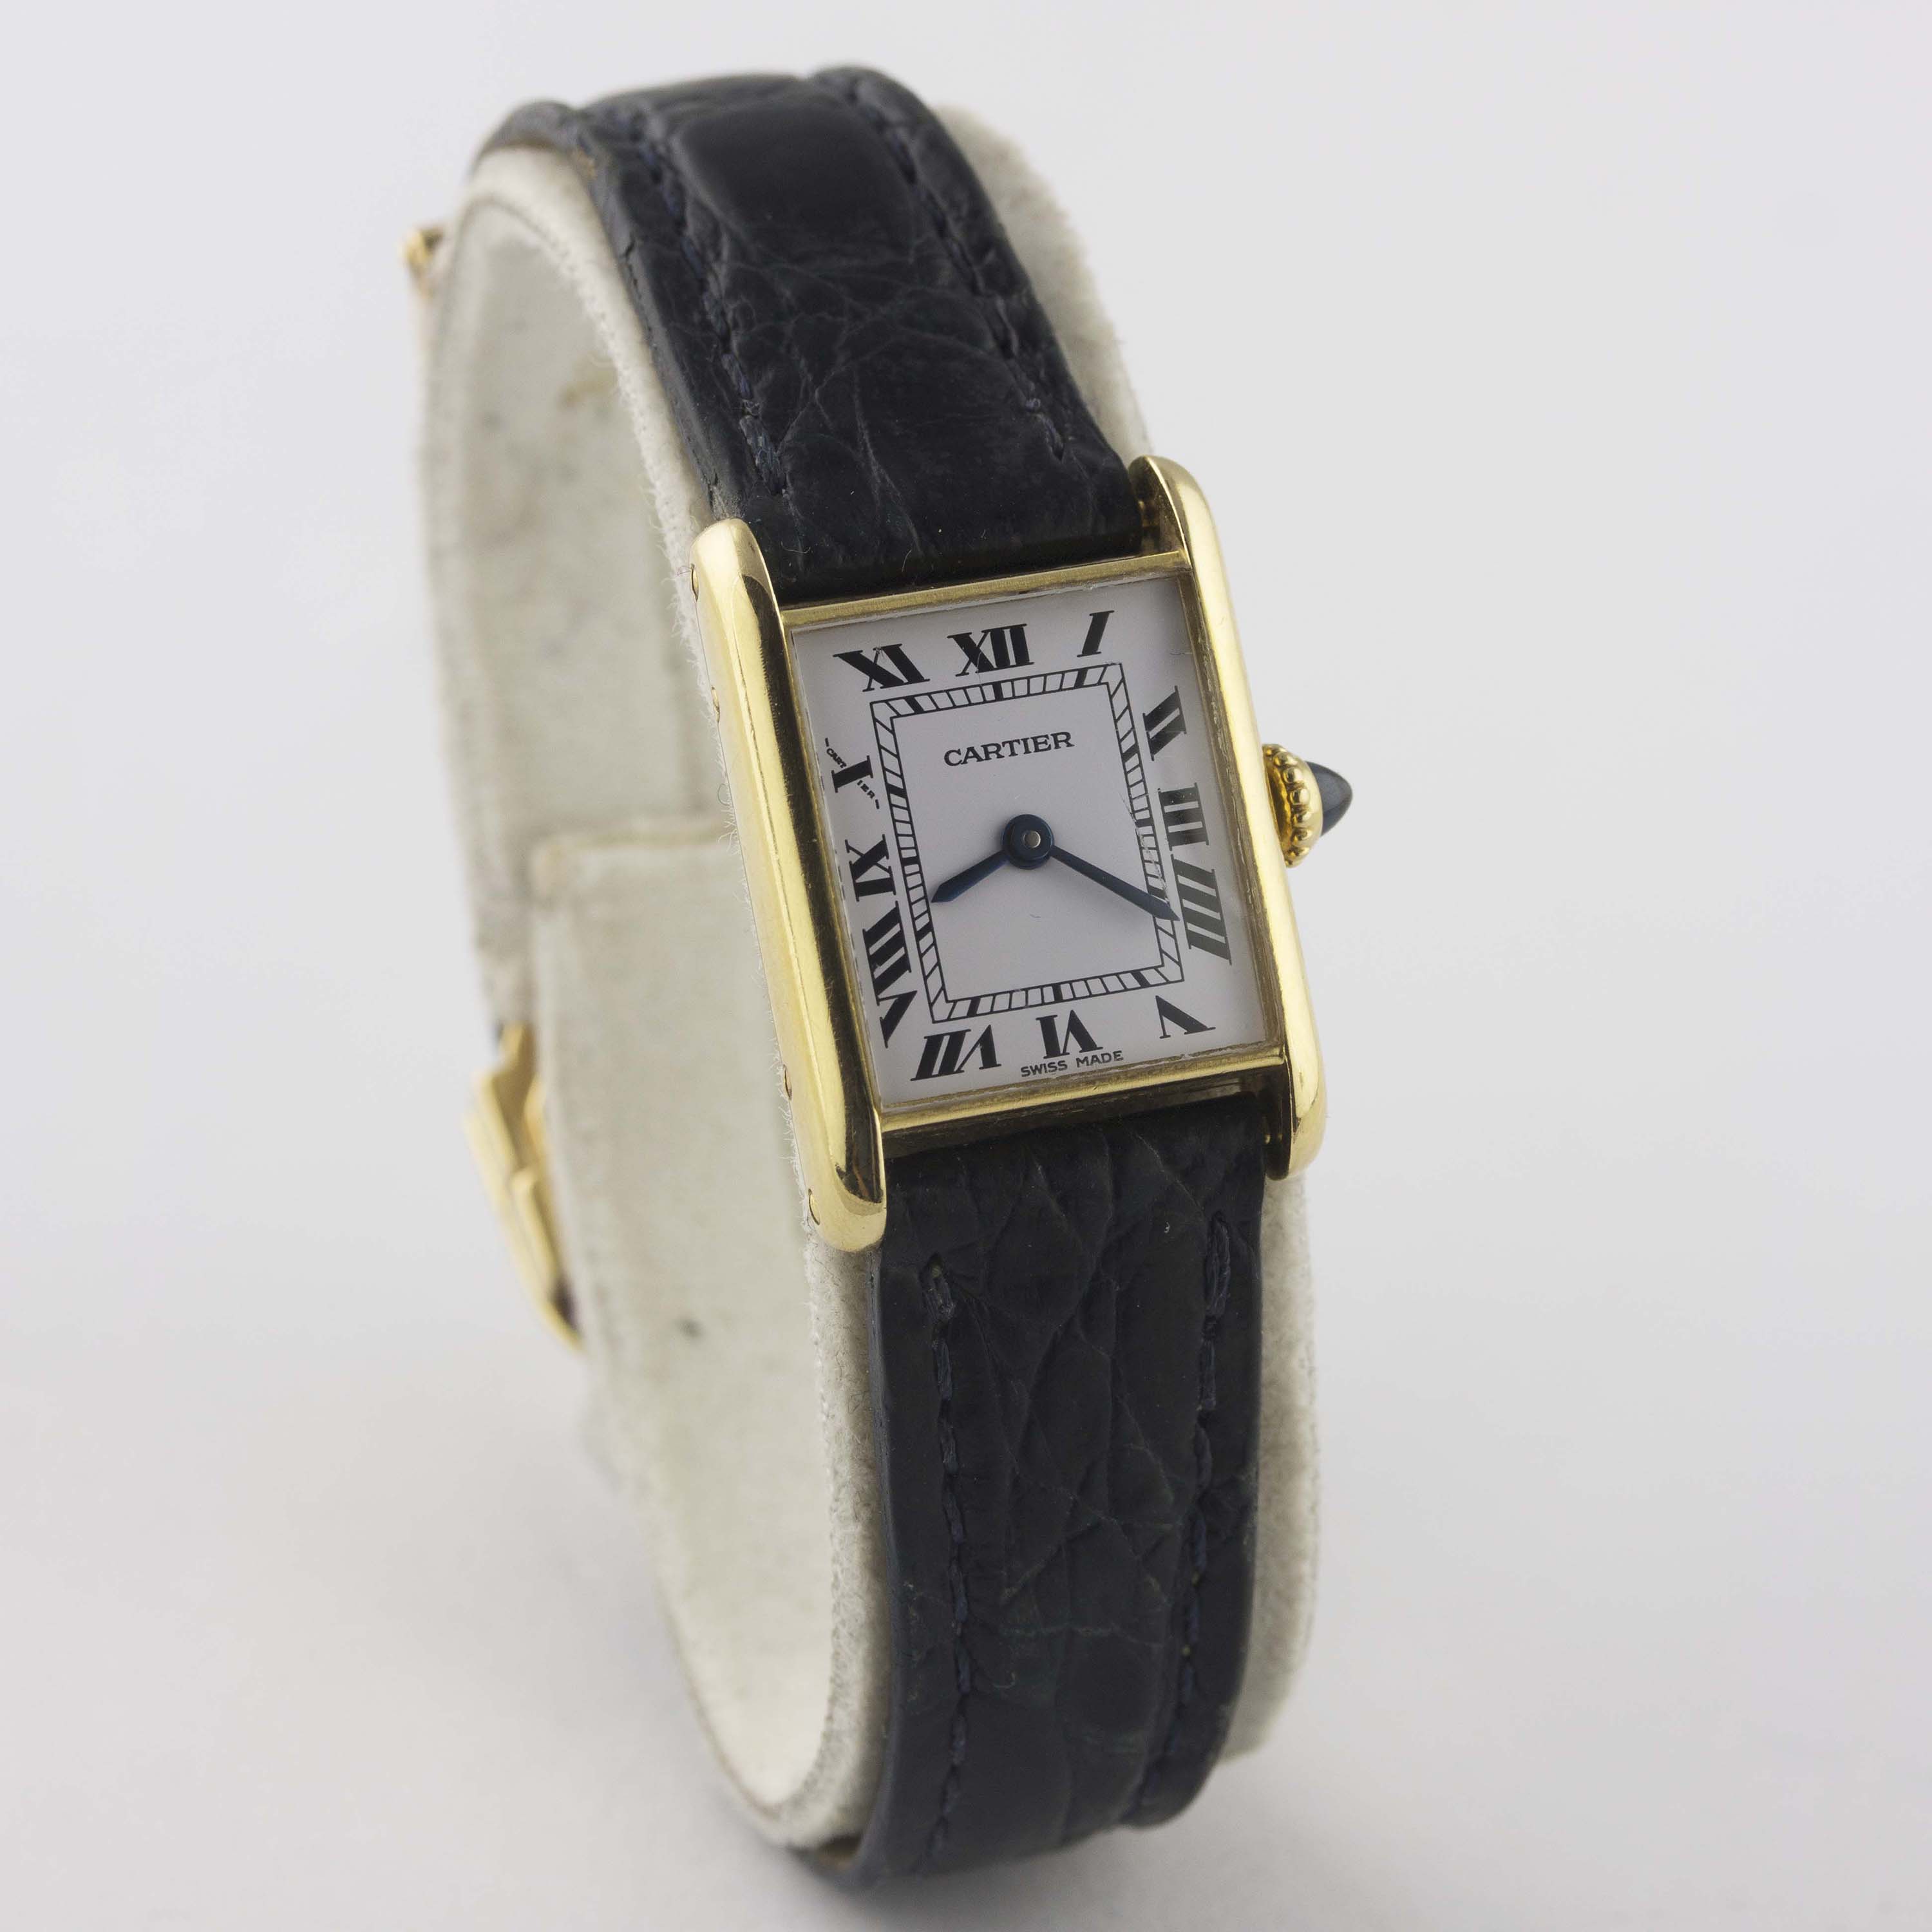 A LADIES 18K SOLID GOLD CARTIER TANK WRIST WATCH CIRCA 1980s Movement: Manual wind, signed - Image 5 of 12